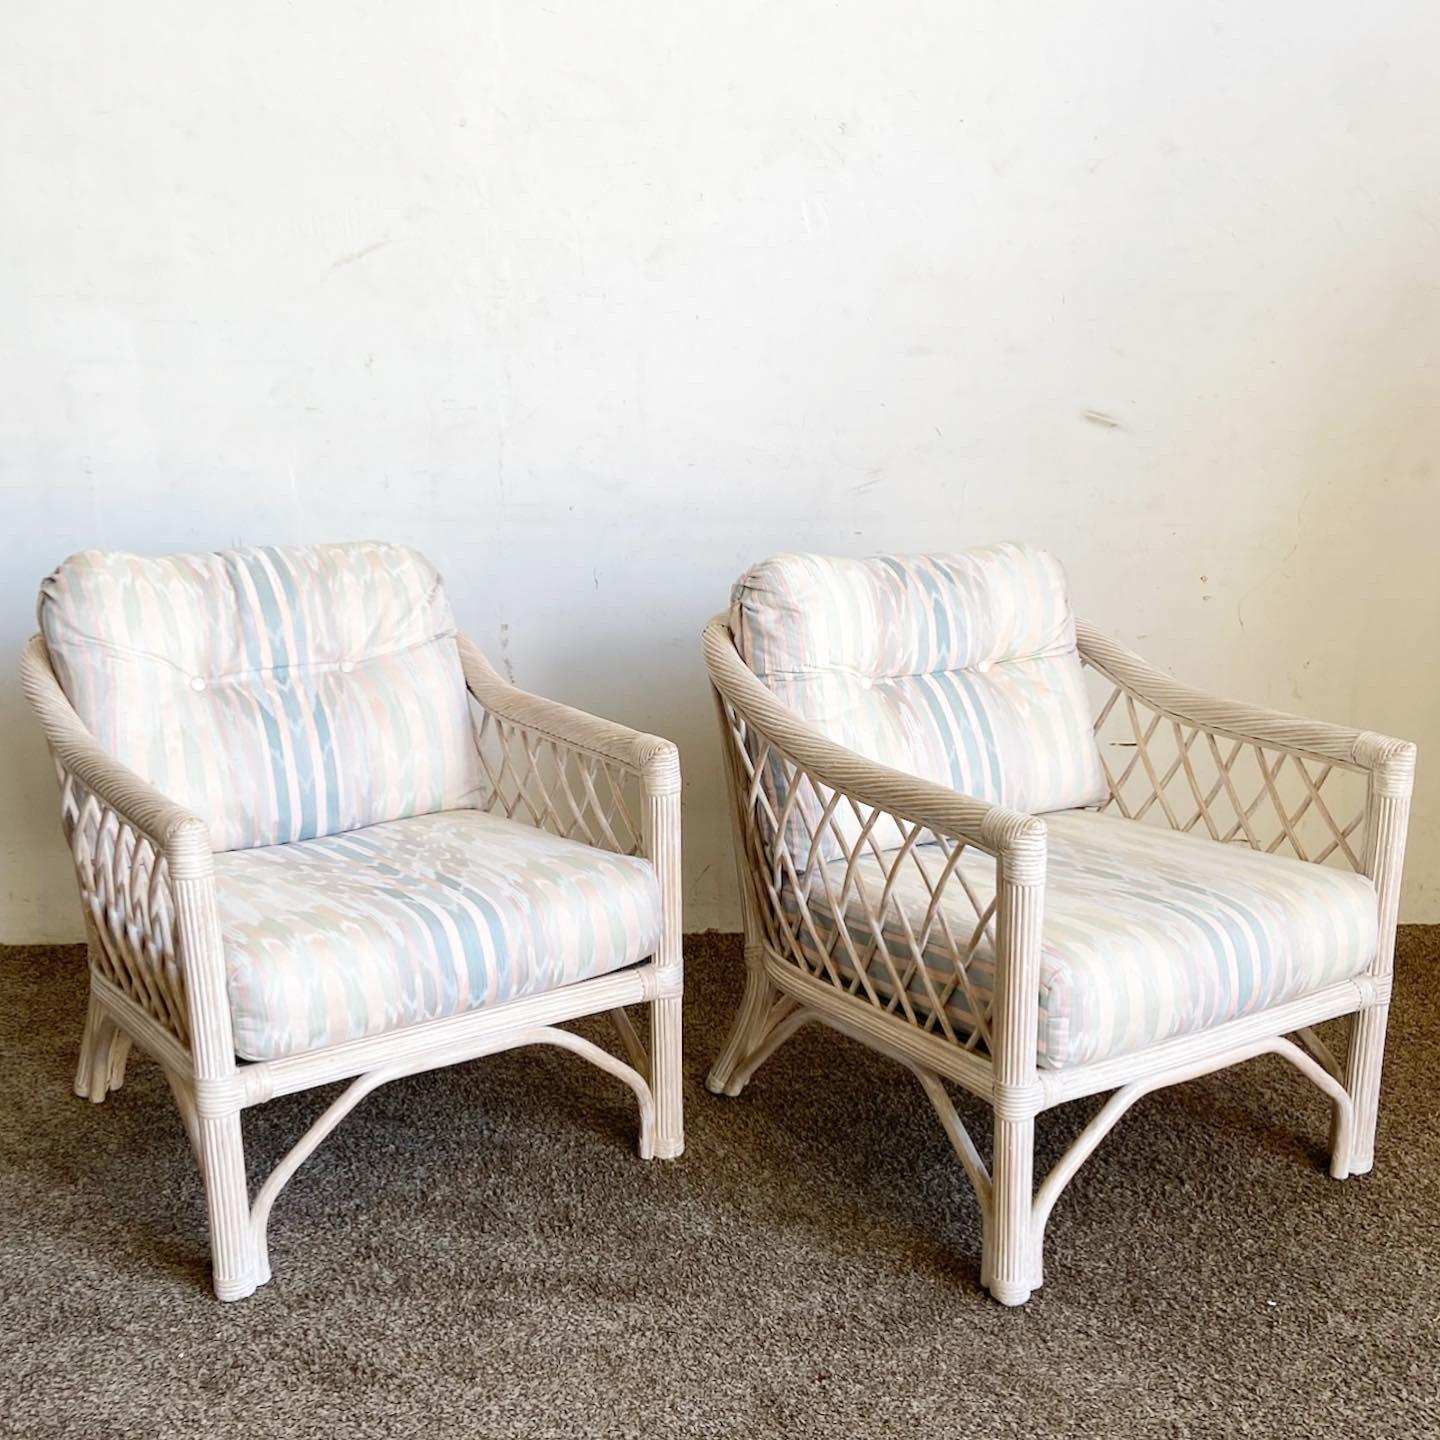 Elevate your space with the Boho Chic Rattan and Pencil Reed Arm Chairs by Henry Link. A perfect blend of earthy elegance and comfort.
Vintage pieces may have age-related wear. Review photos carefully, ask questions, request more images. Orders